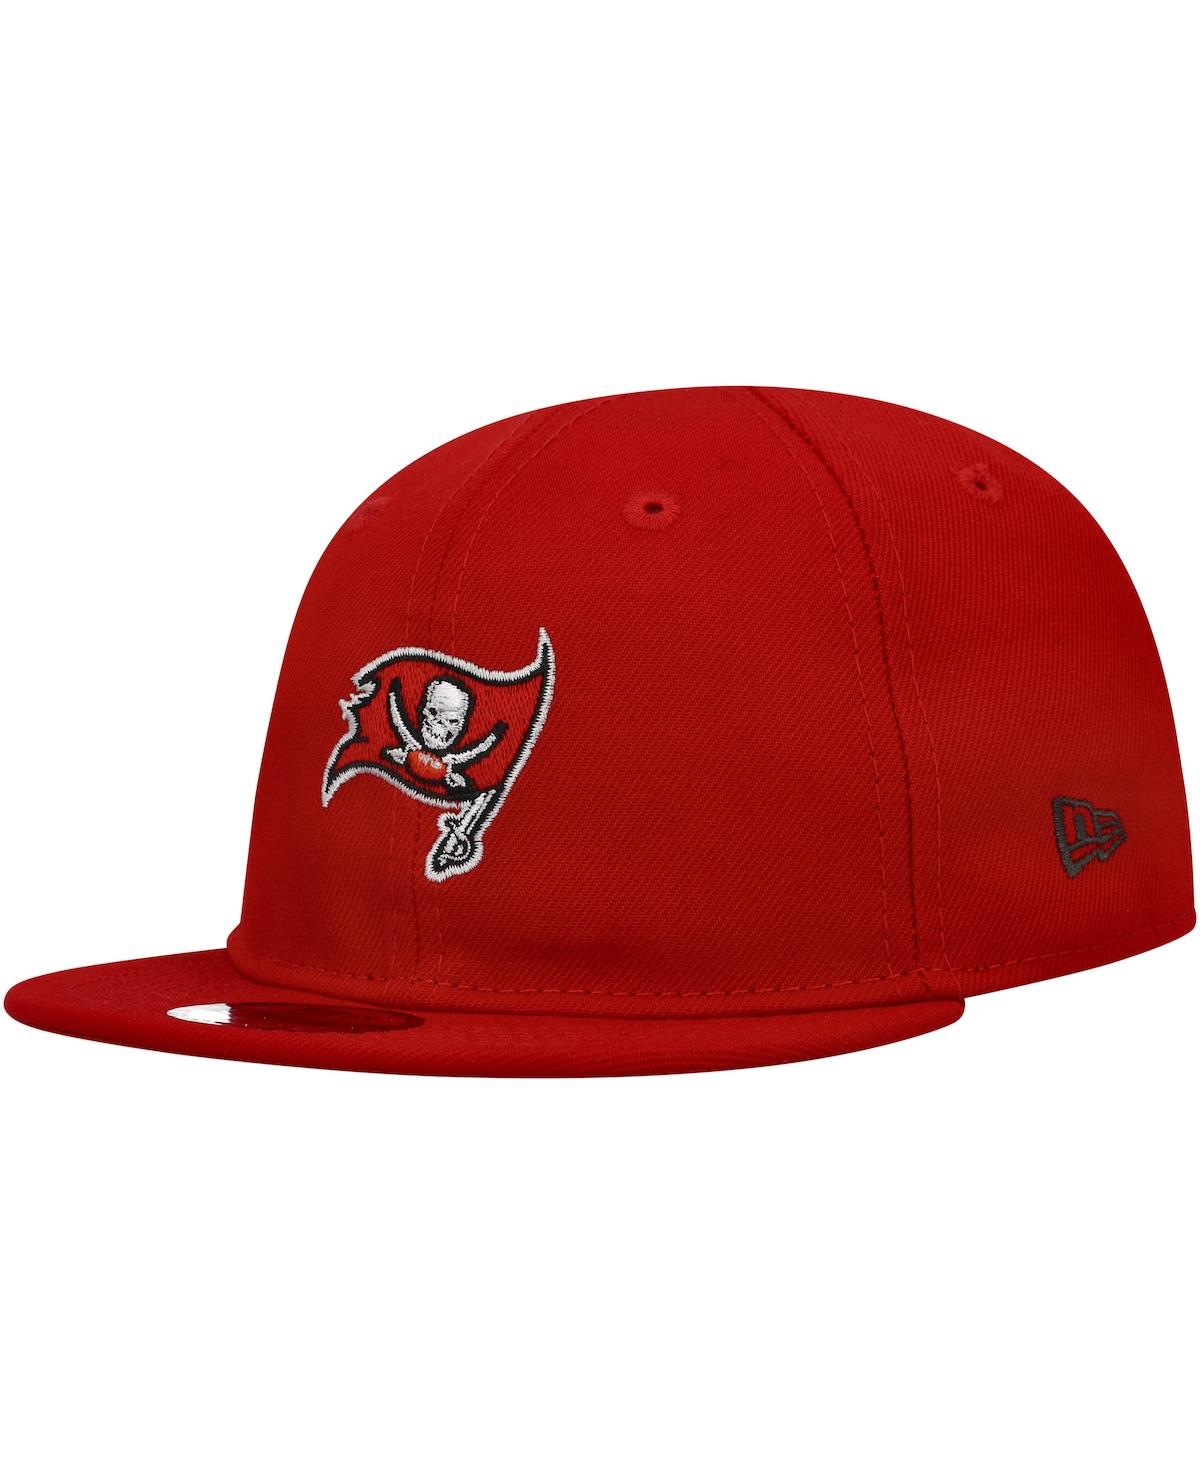 New Era Babies' Infant Boys And Girls  Red Tampa Bay Buccaneers My 1st 9fifty Snapback Hat